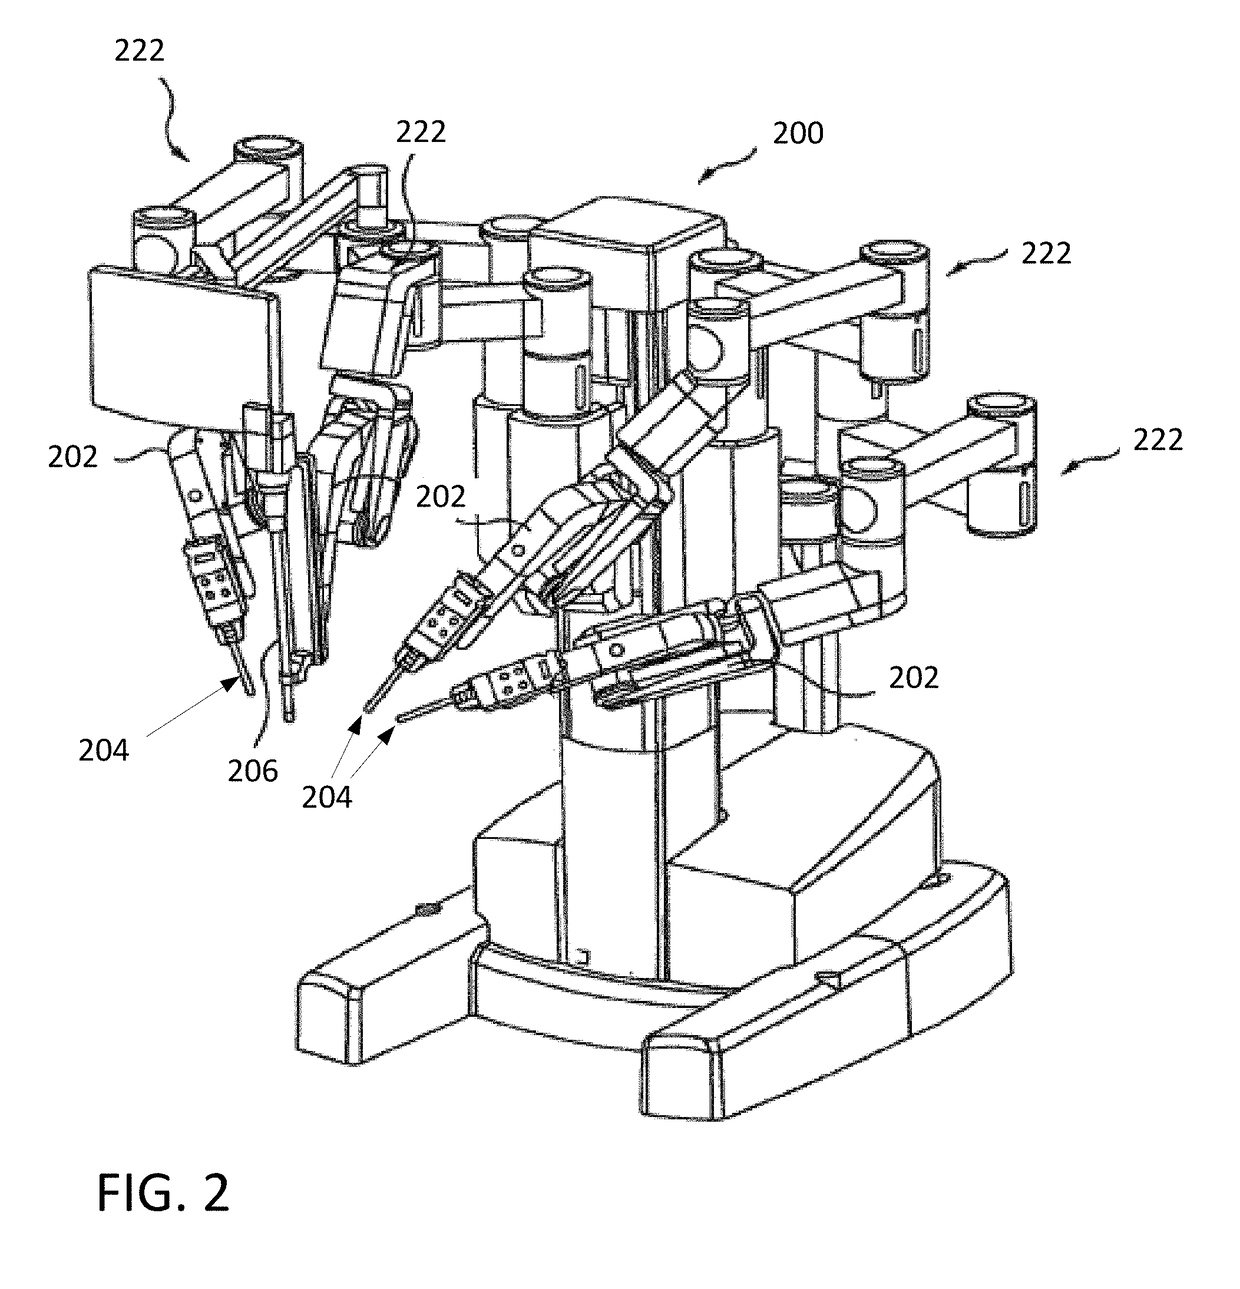 Treatment instrument and high-voltage connectors for robotic surgical system